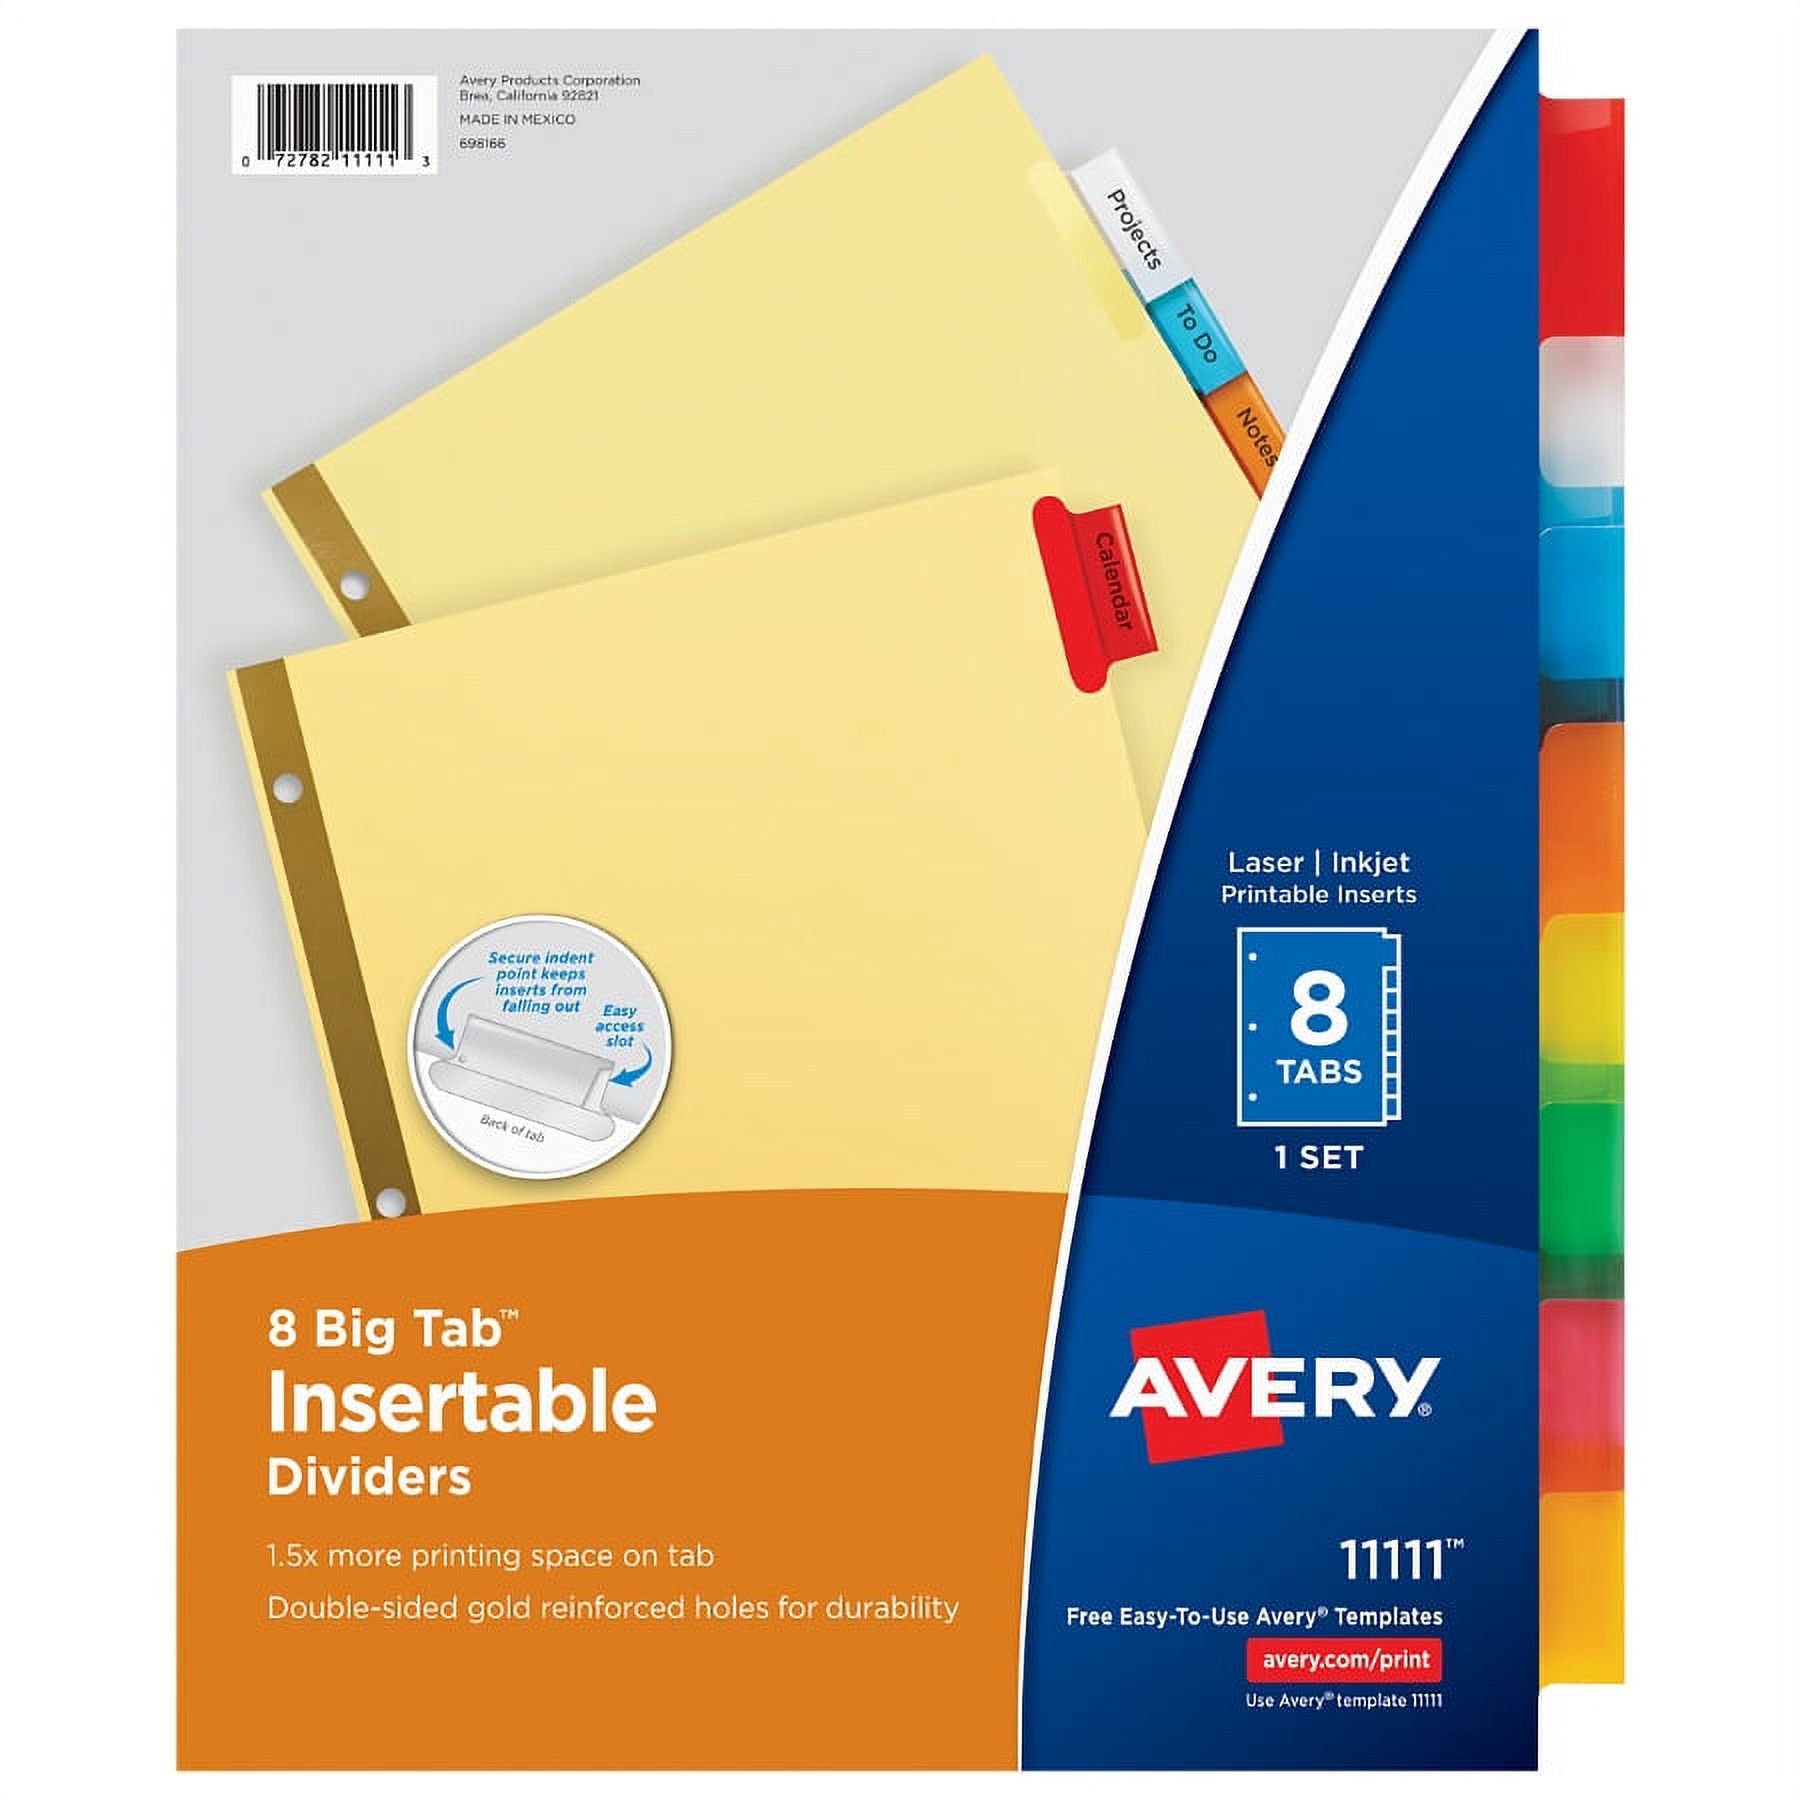 Avery Big Tab Insertable Dividers, Buff Paper, Multicolor Tabs, 8-Tab Set (11111) - image 1 of 4